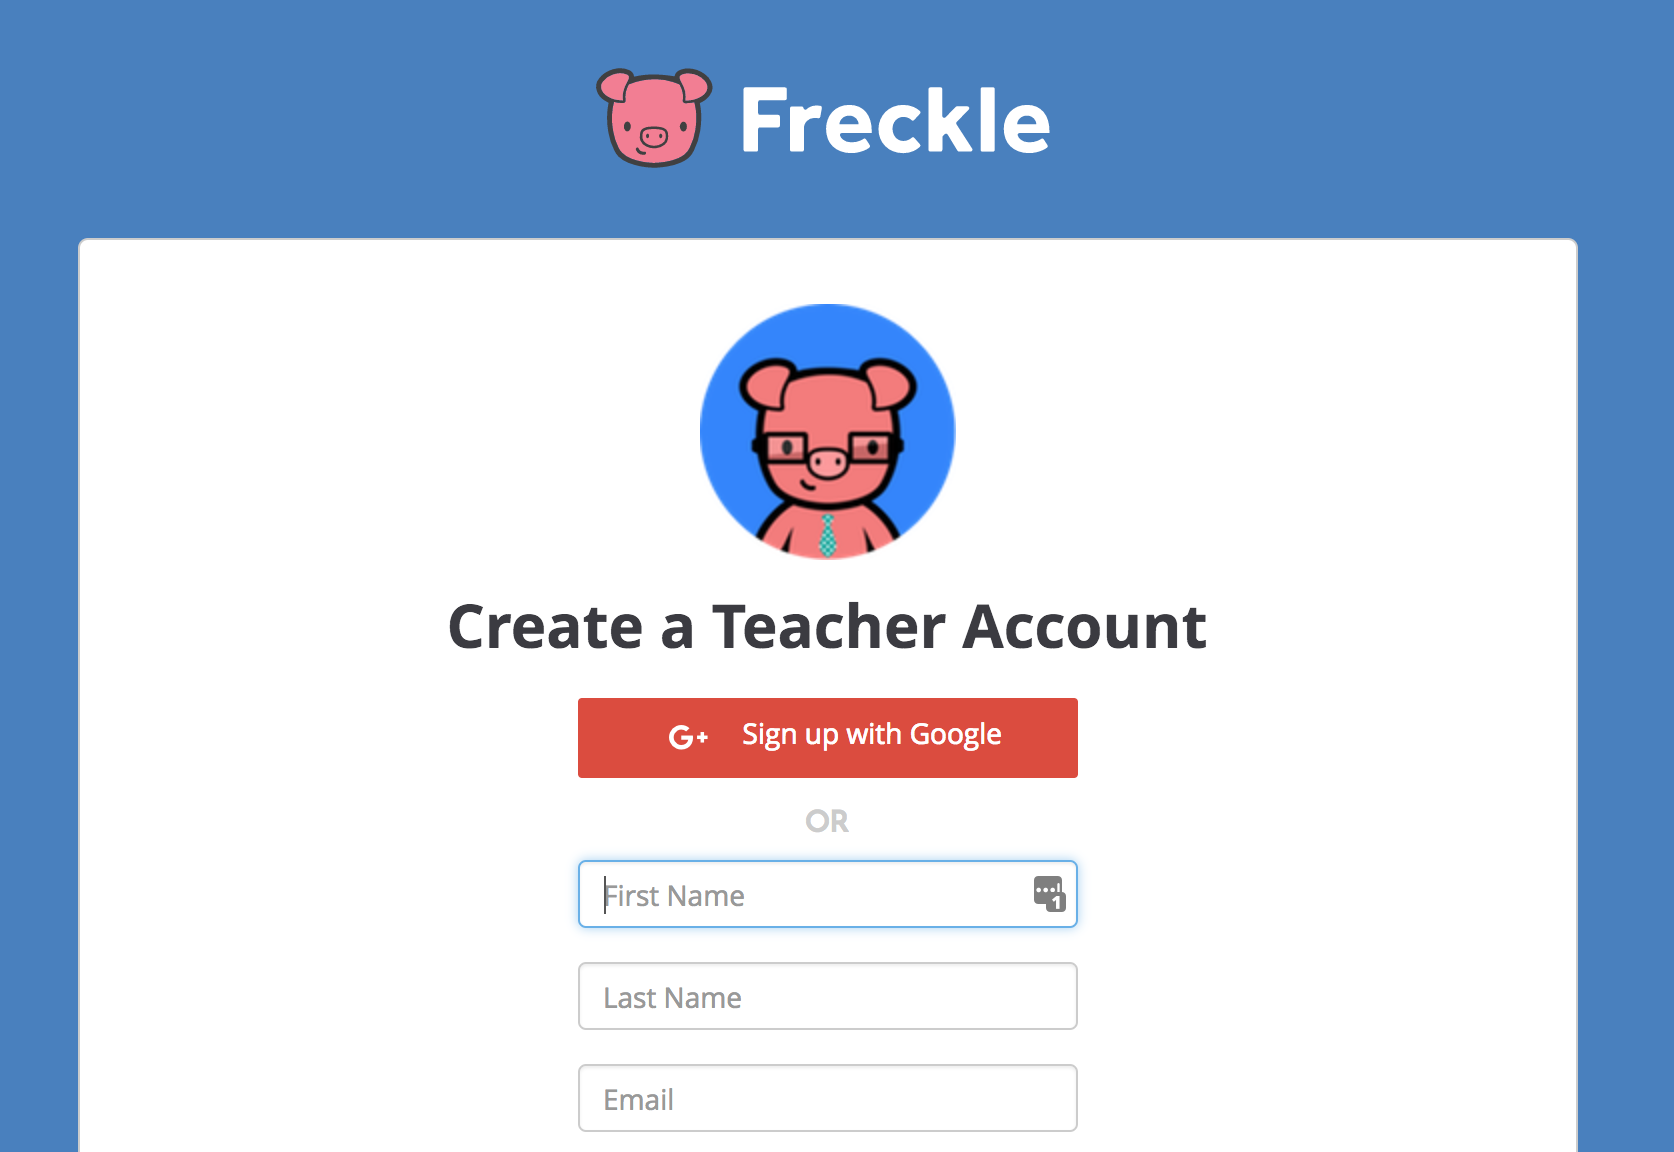 The Create a Teacher Account form, where you can sign up with Google or with your first name, last name, and email.